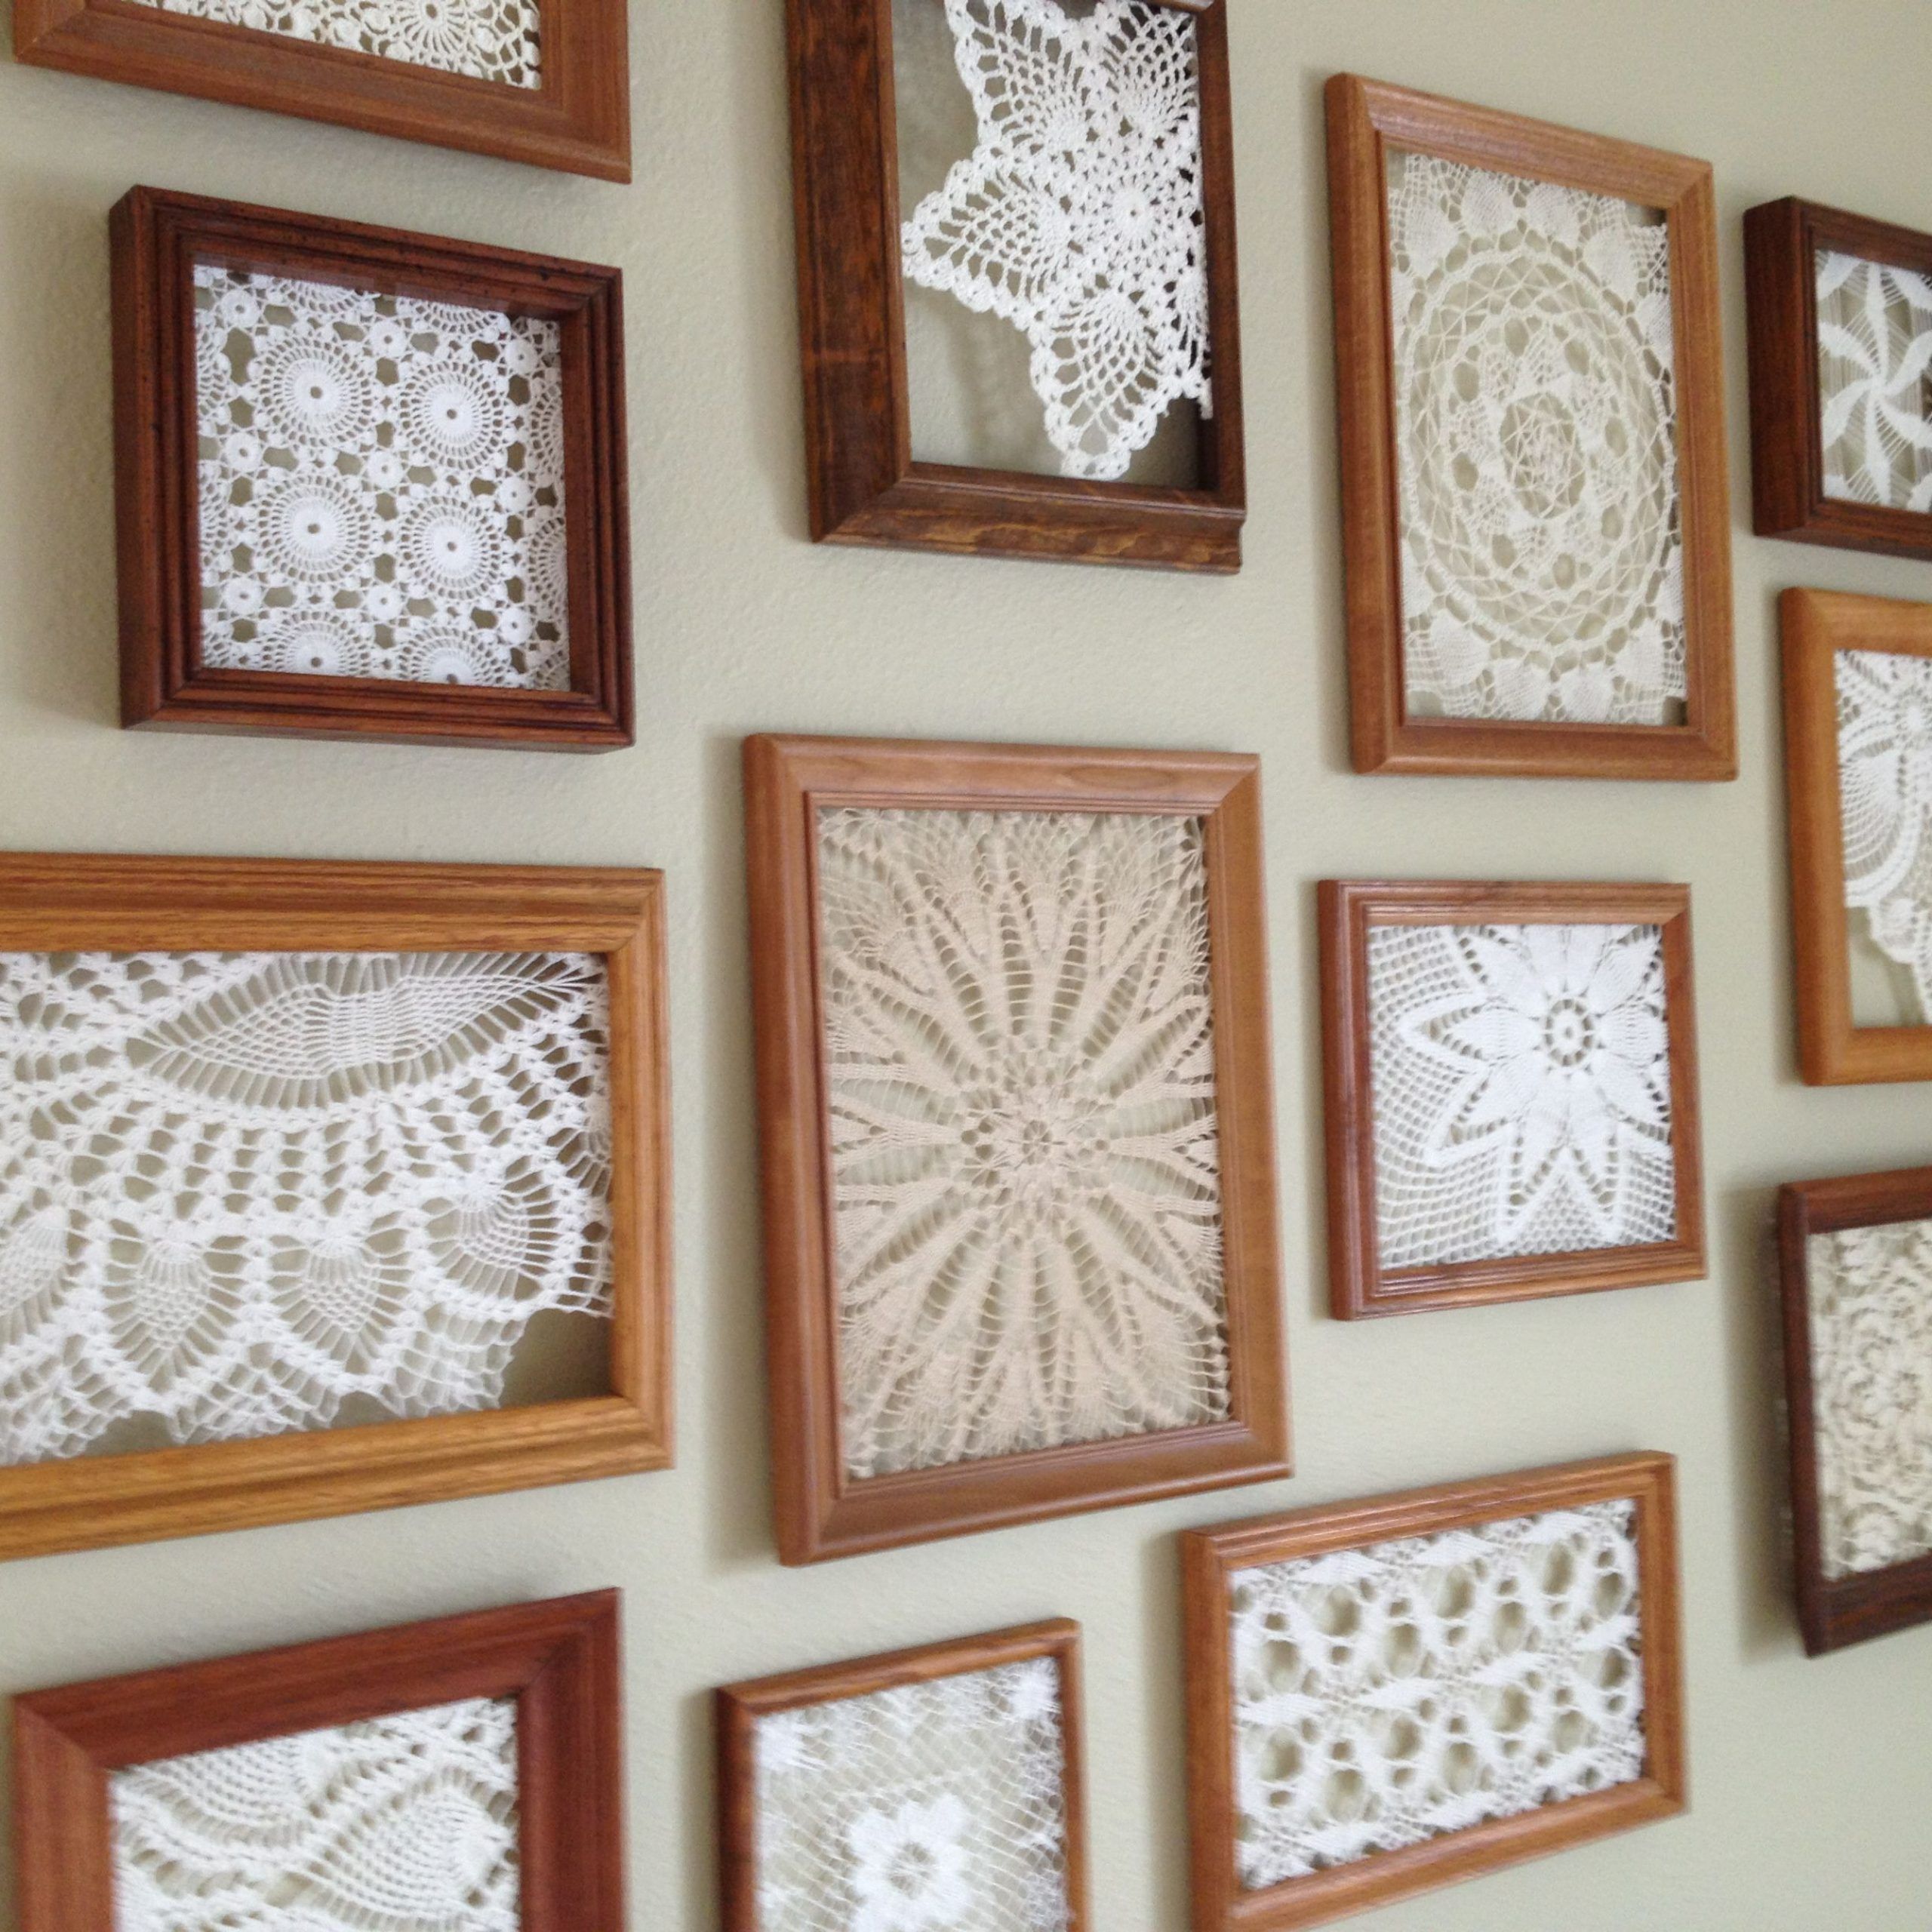 An Inexpensive Way To Fill A Big, Blank Wall – Thrifted Frames With For Lace Wall Art (View 3 of 15)